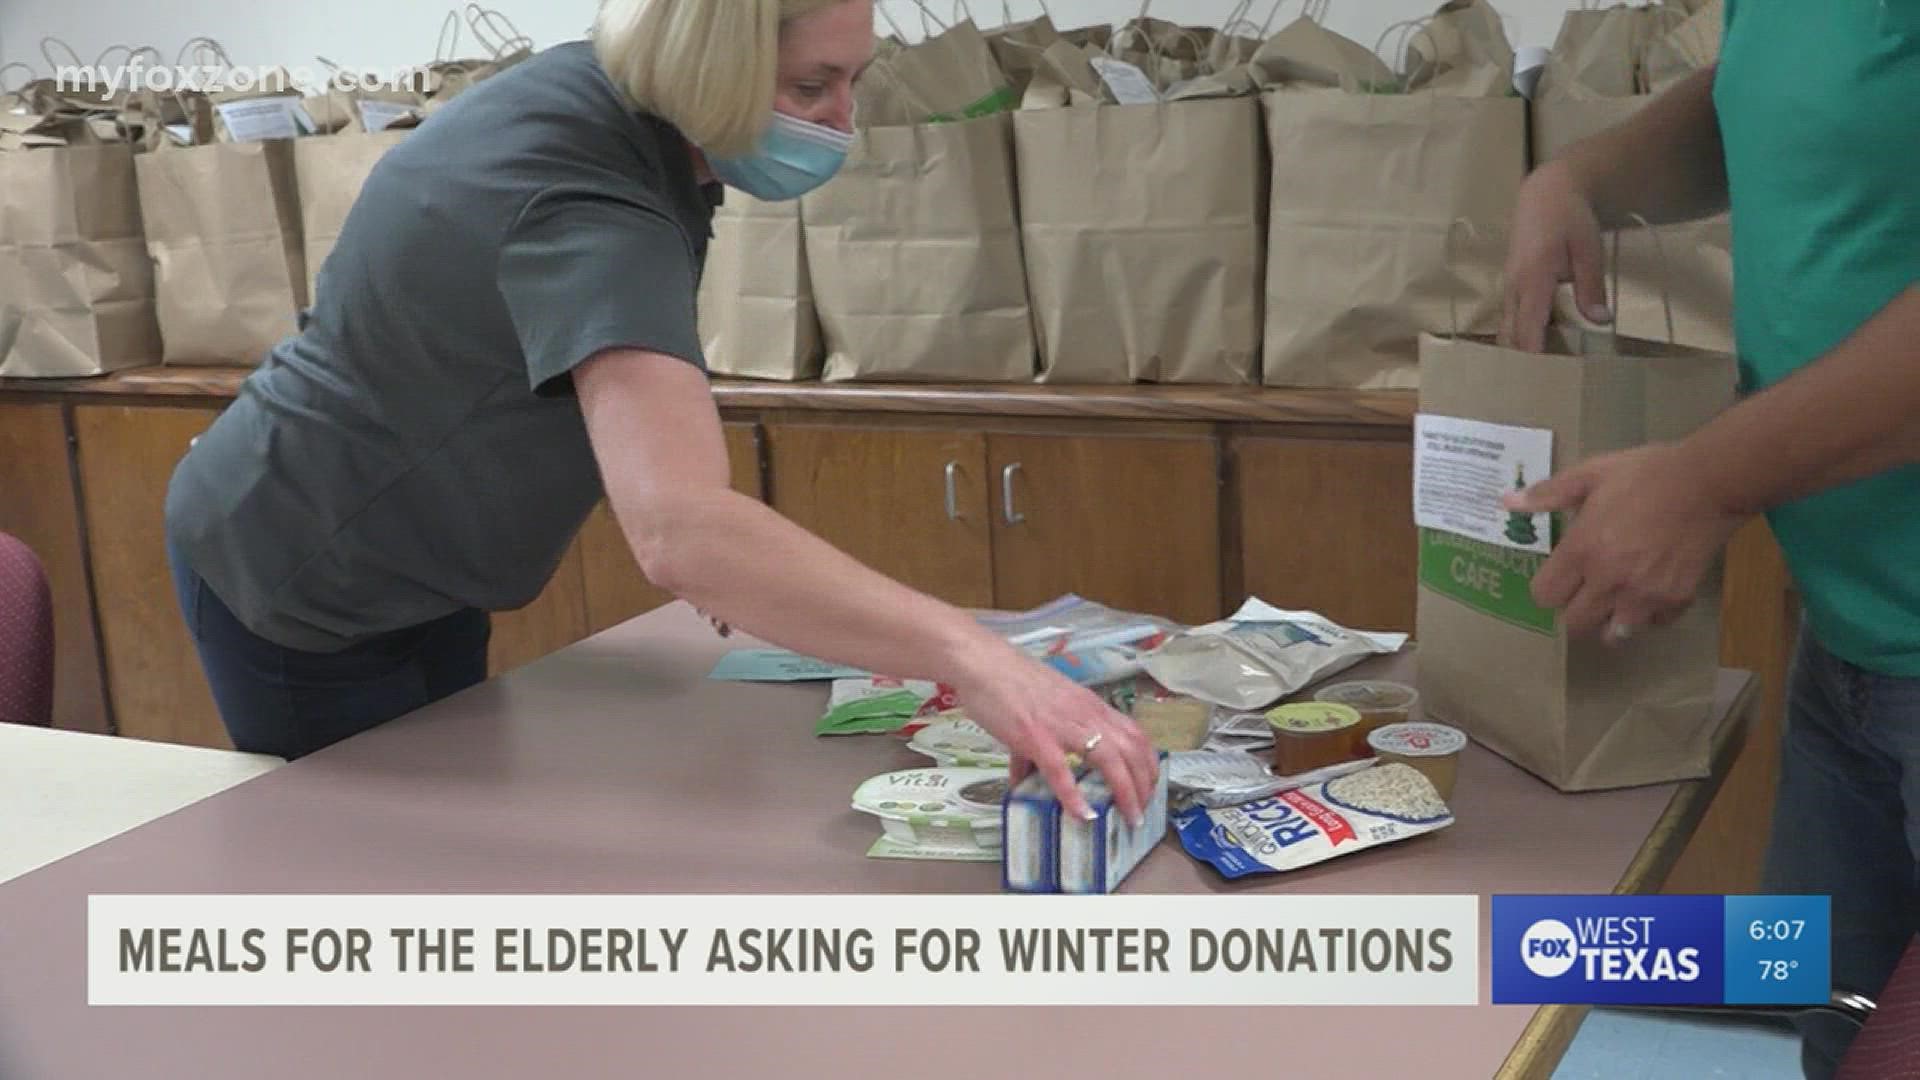 While food and water is always appreciated, the organization is more in need of supplies to keep the elderly warm.